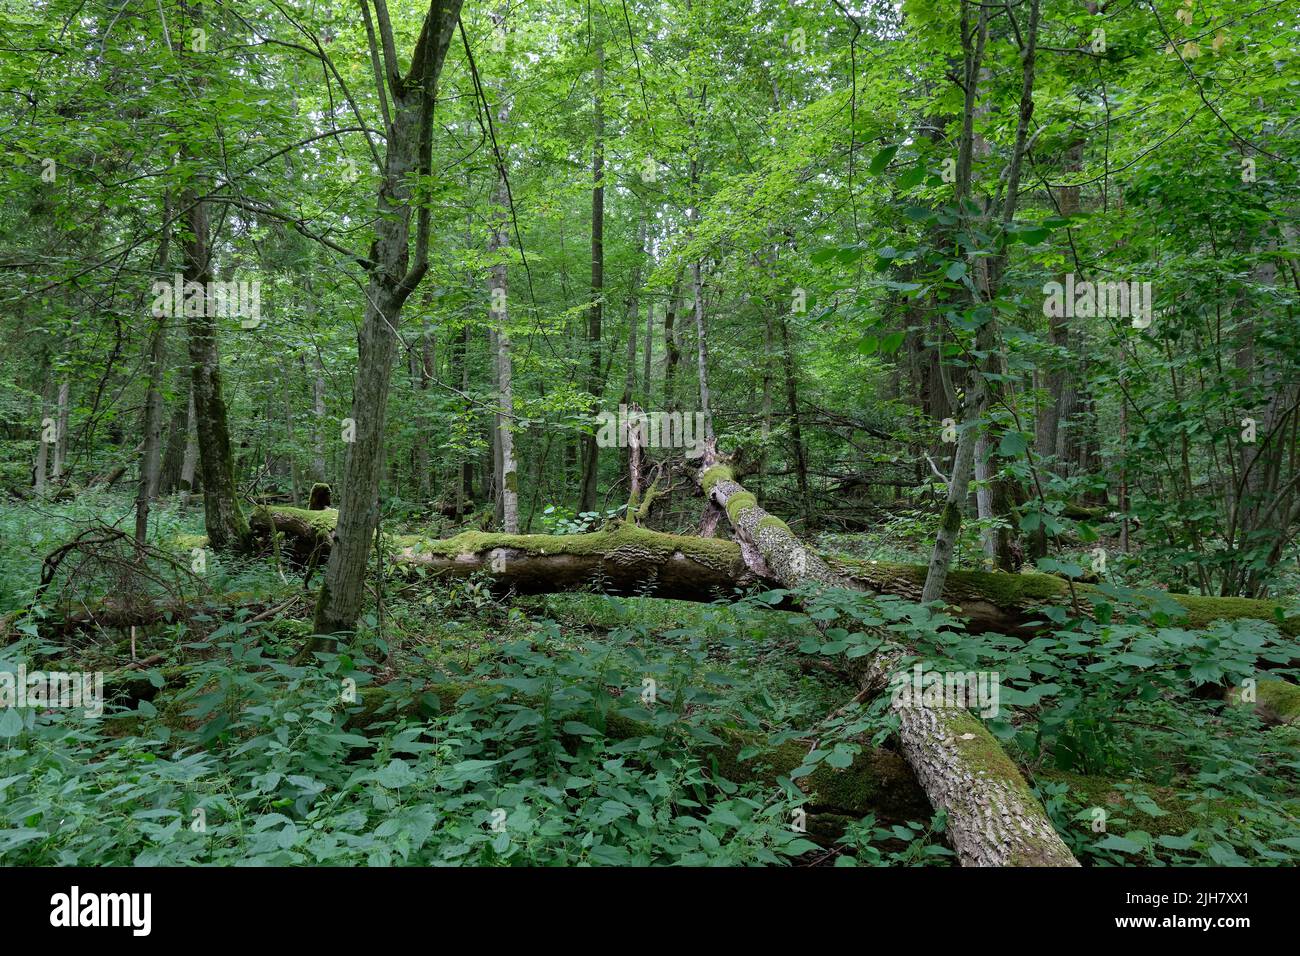 Broken old ash trees moss wrapped lying among plants in summertime deciduous tree stand, Bialowieza Forest, Poland, Europe Stock Photo